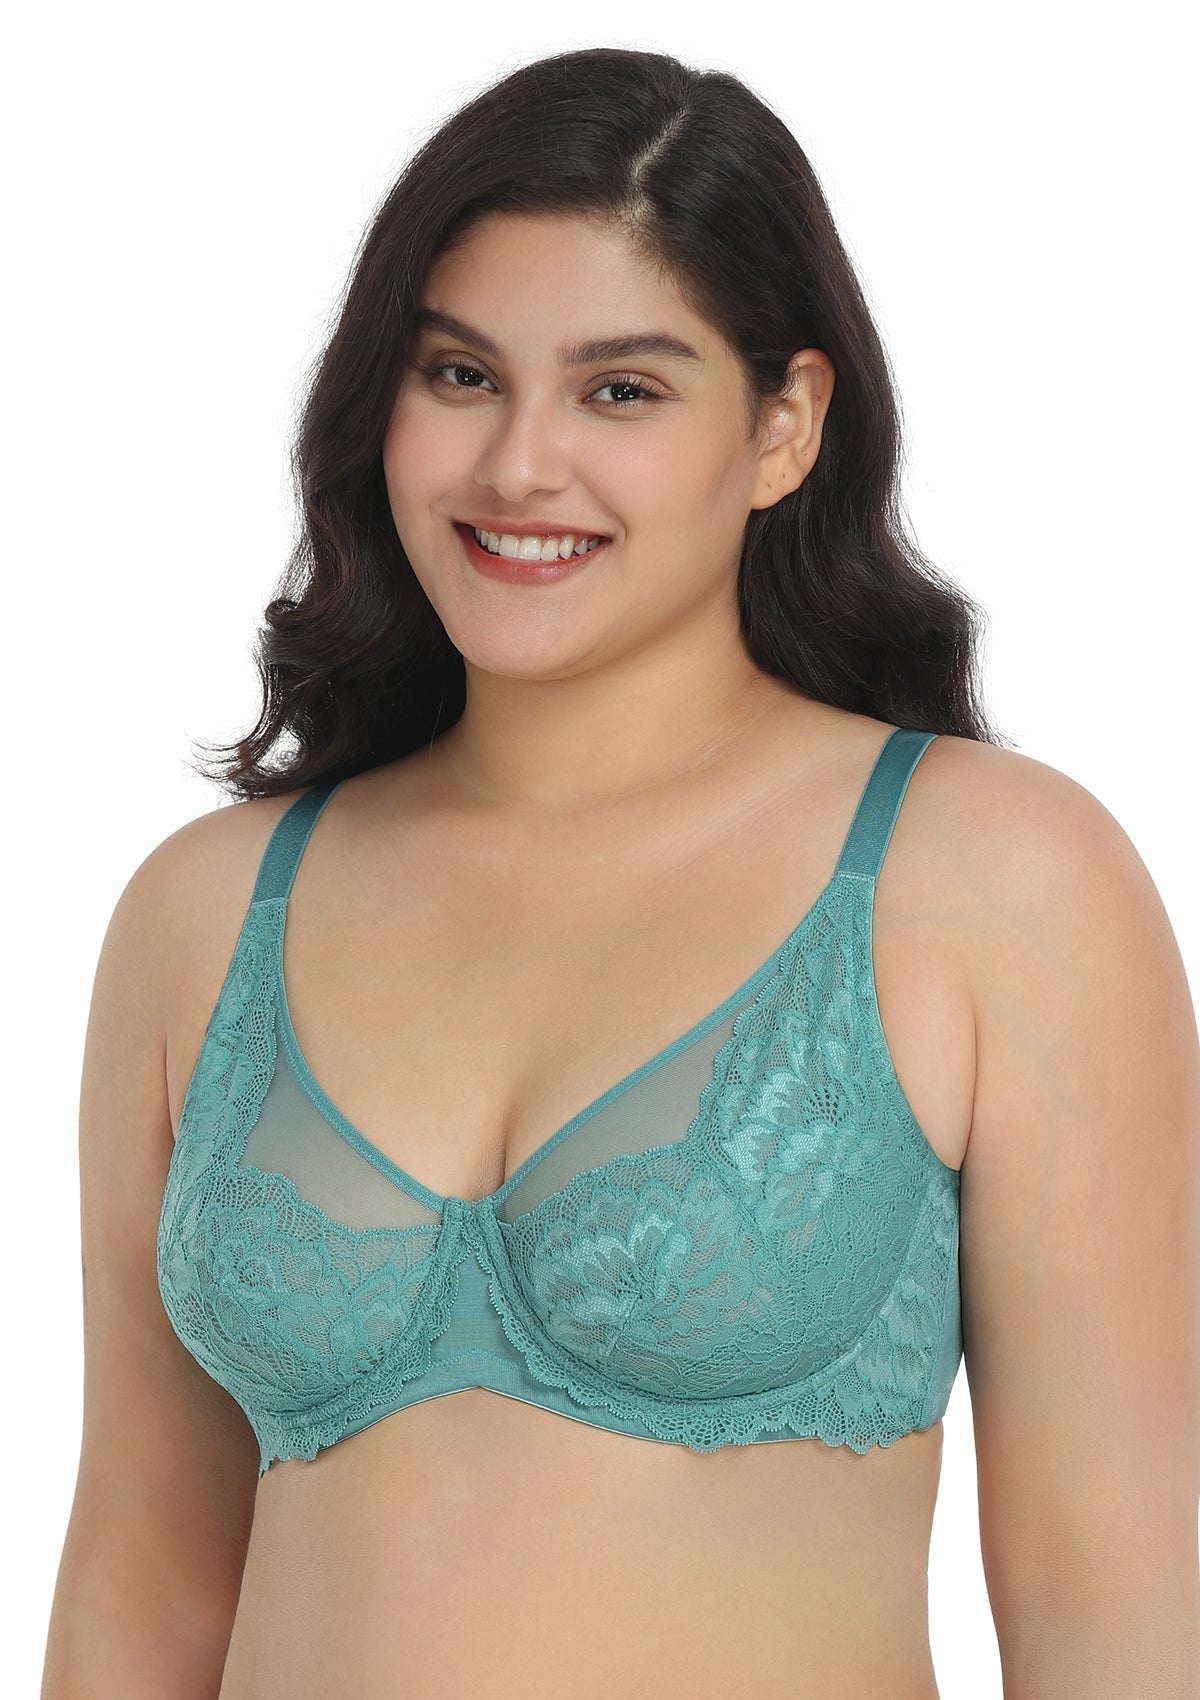 HSIA Paeonia Lace Full Coverage Underwire Non-Padded Uplifting Bra - Teal / 42 / DD/E